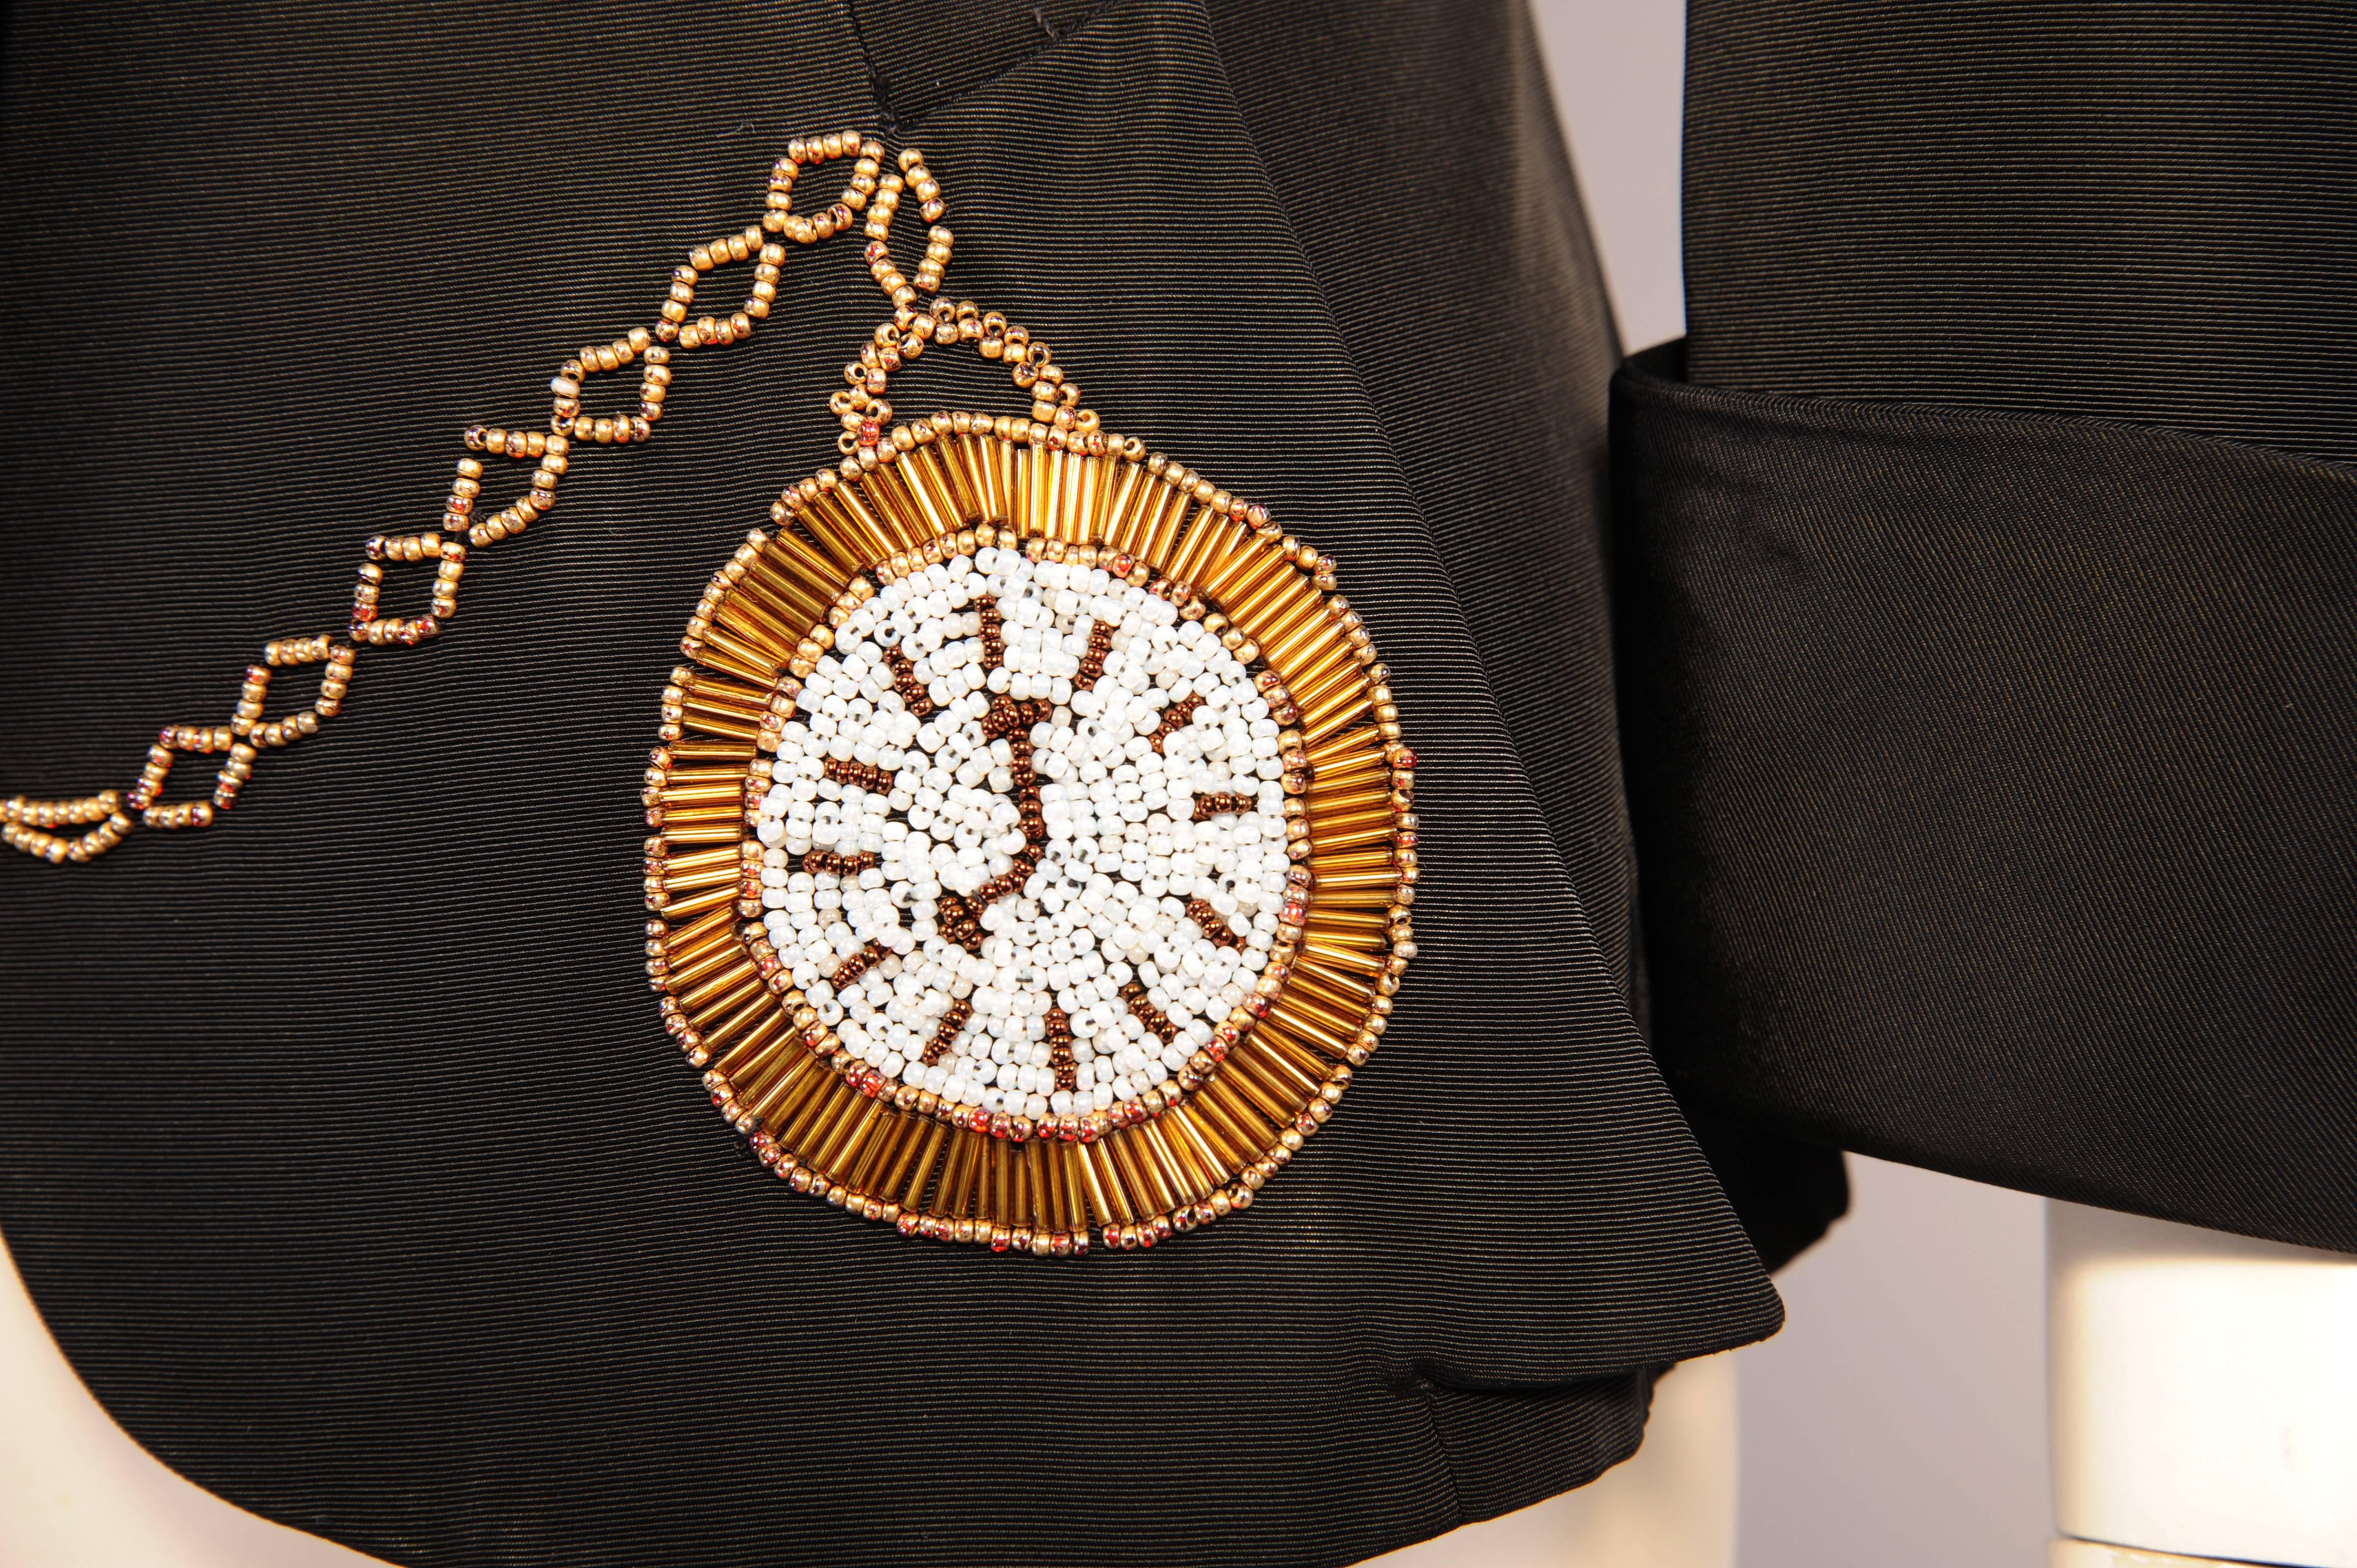 In the style of Elsa Schiaparelli this jacket has a whimsical beaded pocket watch theme. The classic notched lapel has a beaded watch face on the right lapel with a beaded chain and diamante fob circling around the neck to the top of the left lapel.